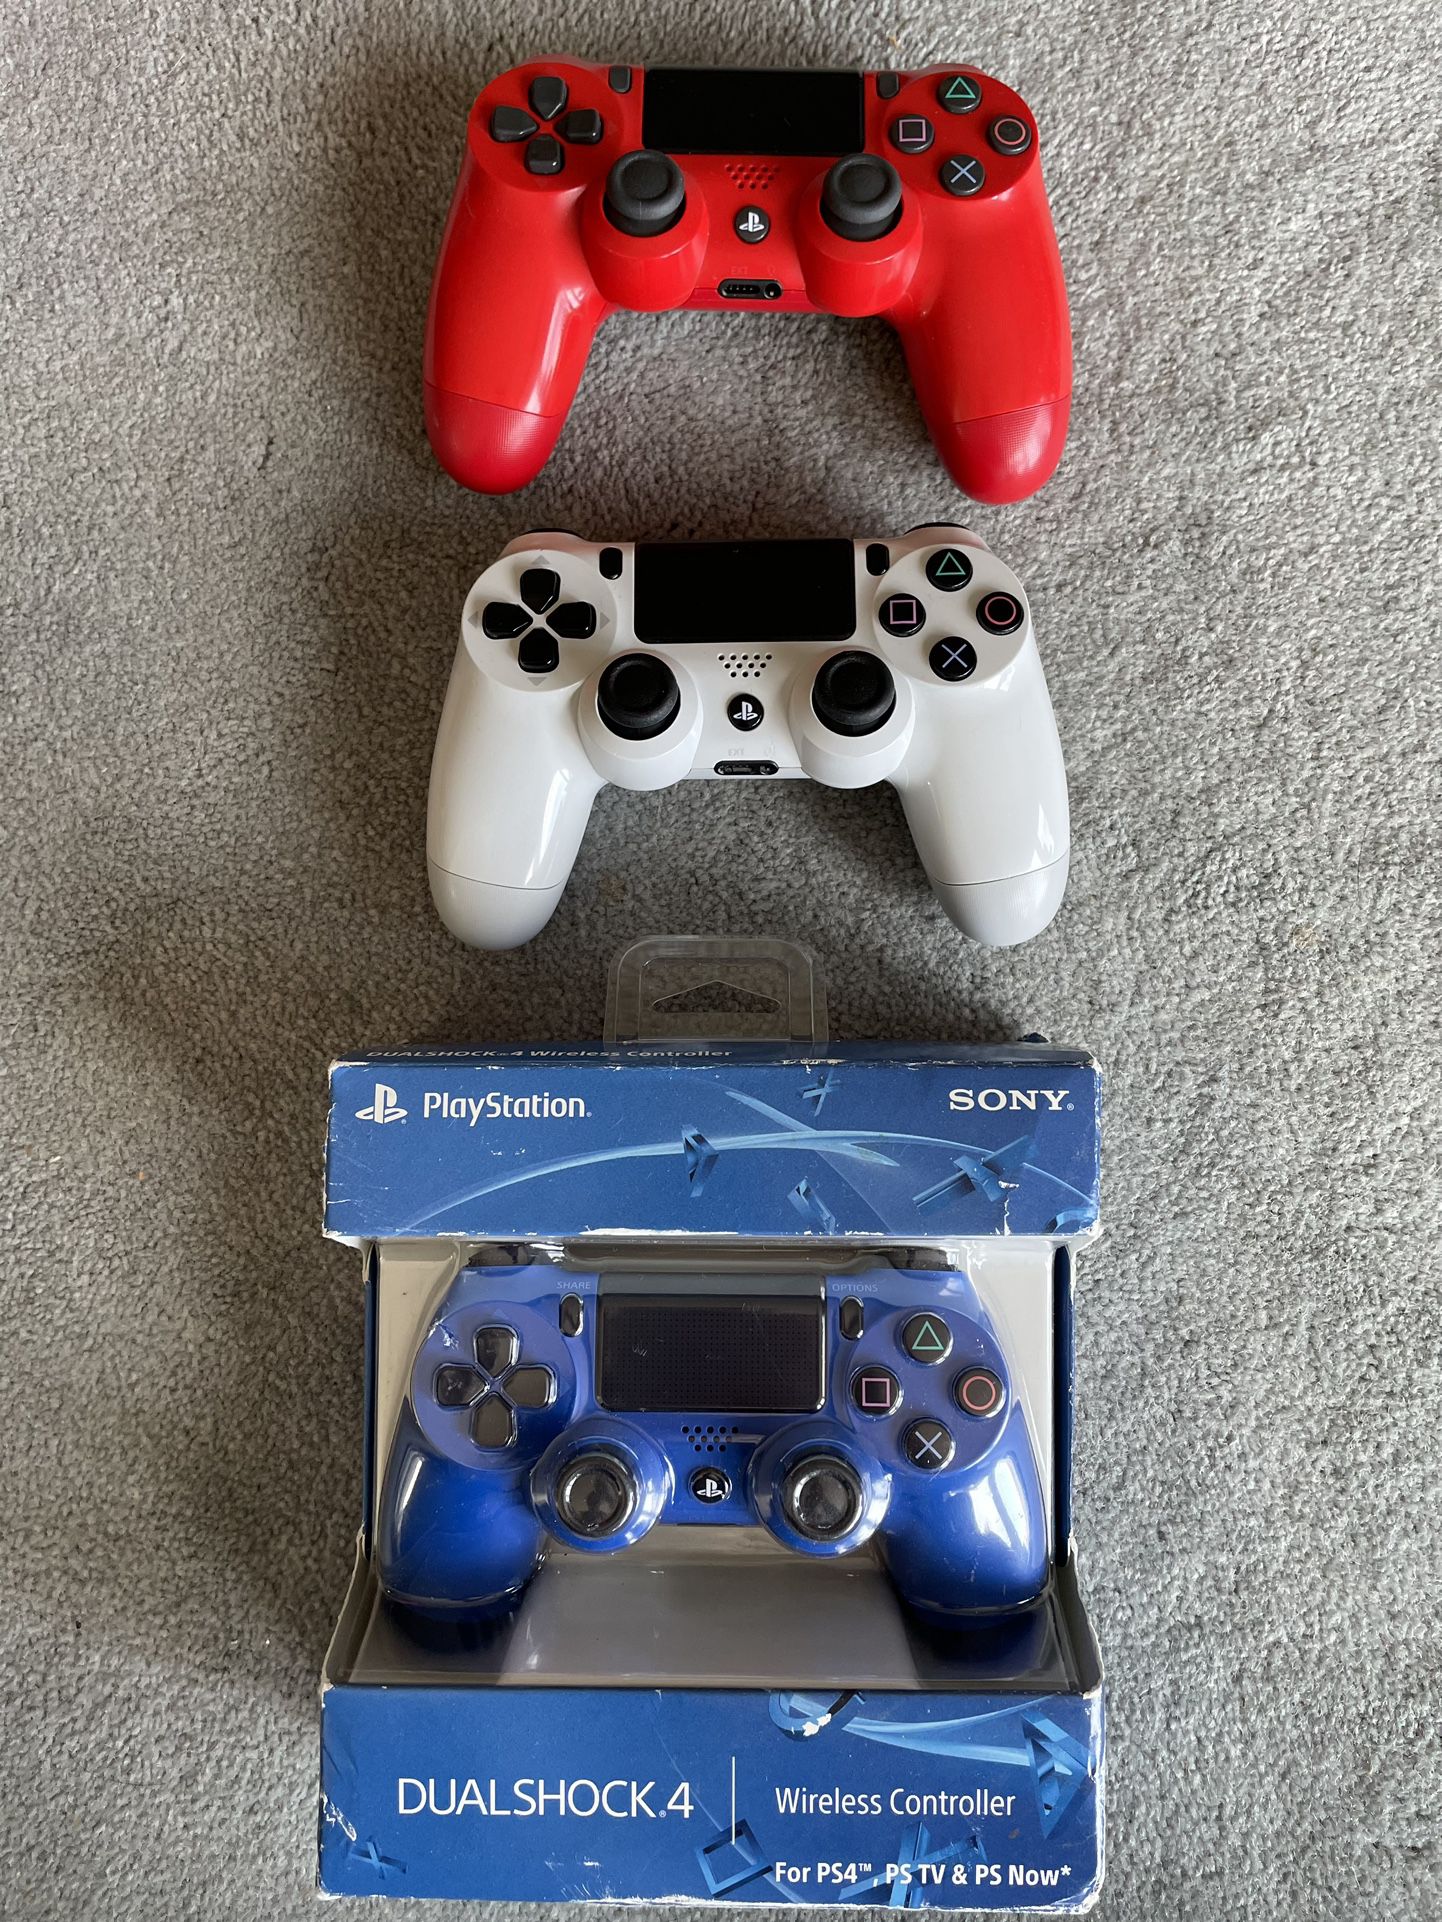 red, white and blue DualShock 4 controllers